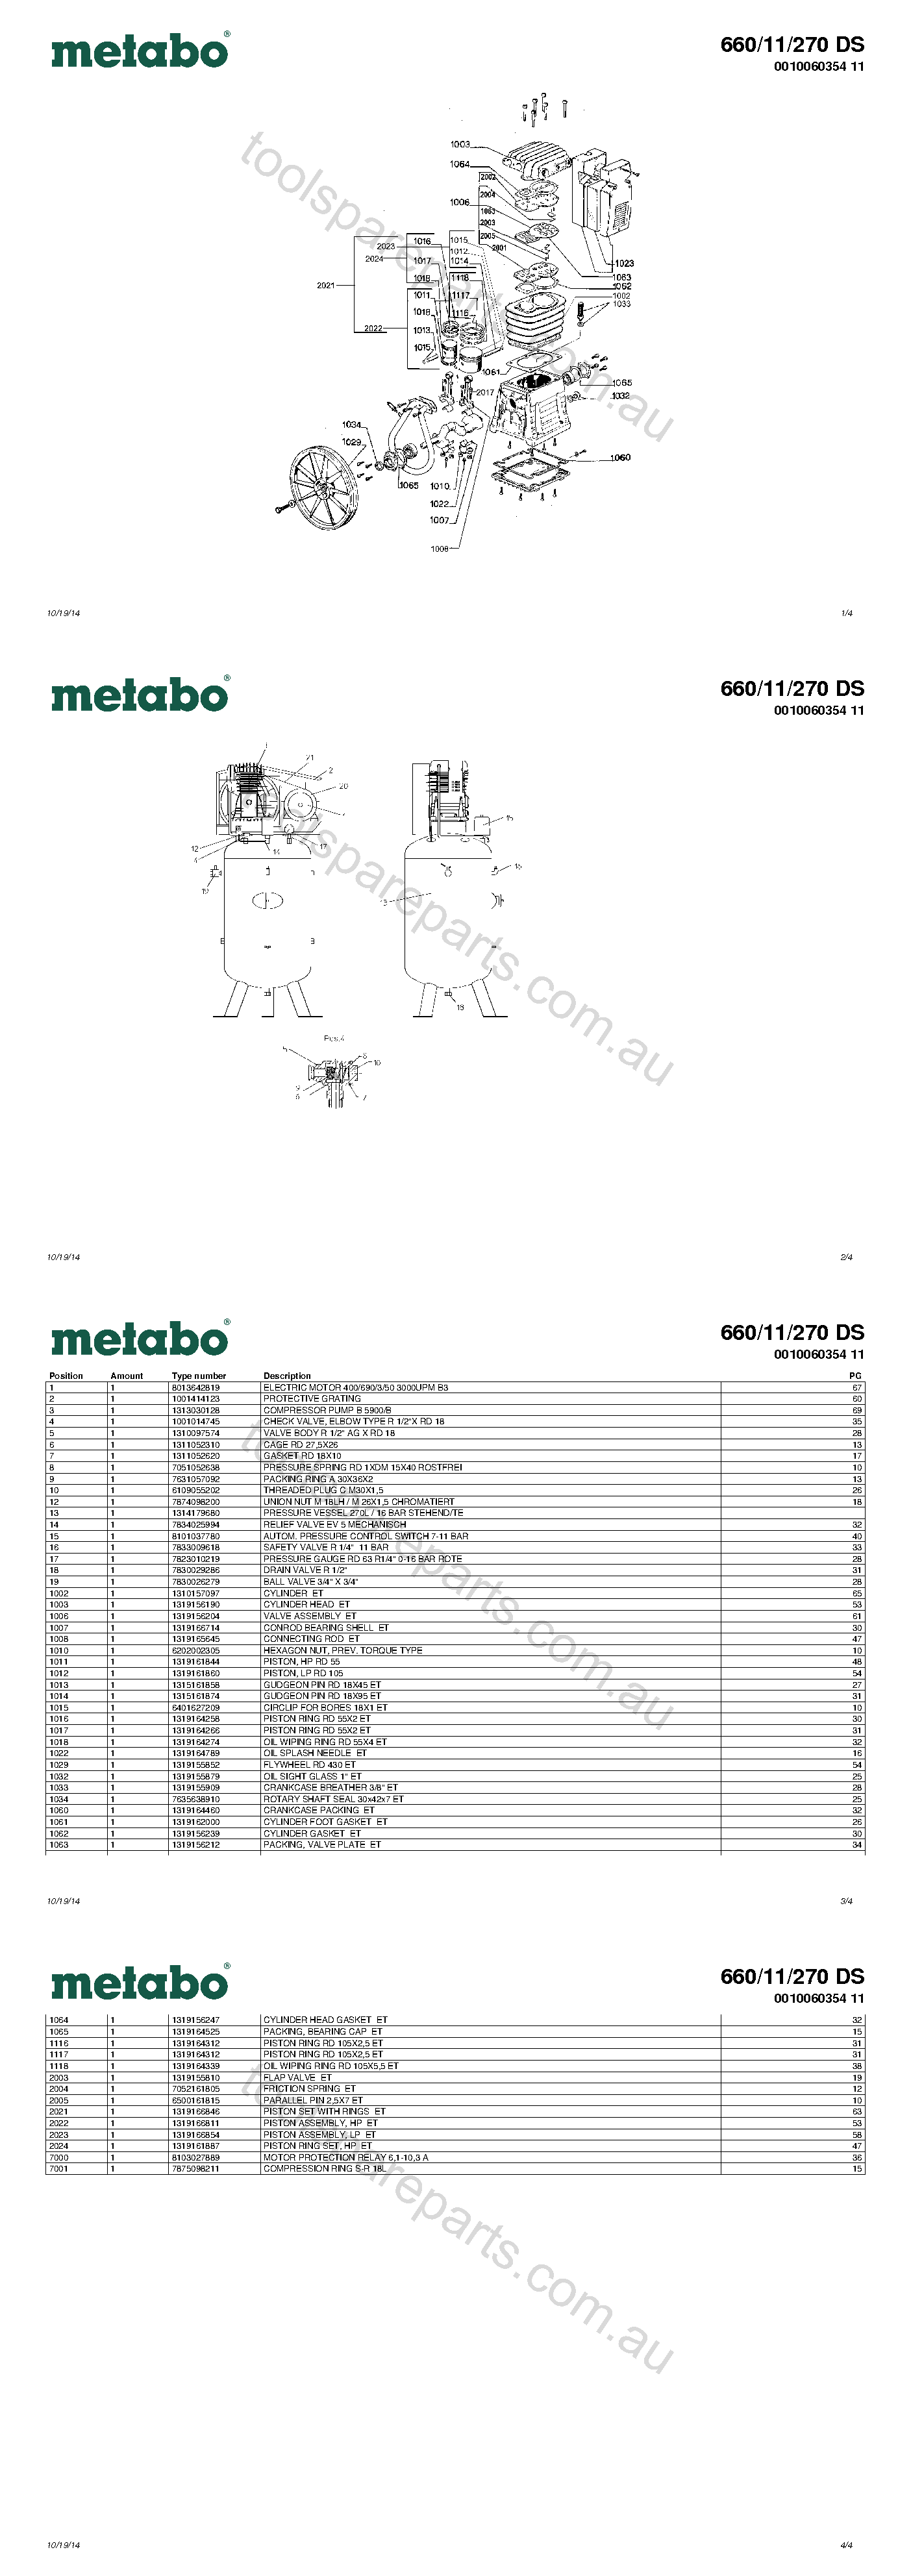 Metabo 660/11/270 DS 0010060354 11  Diagram 1